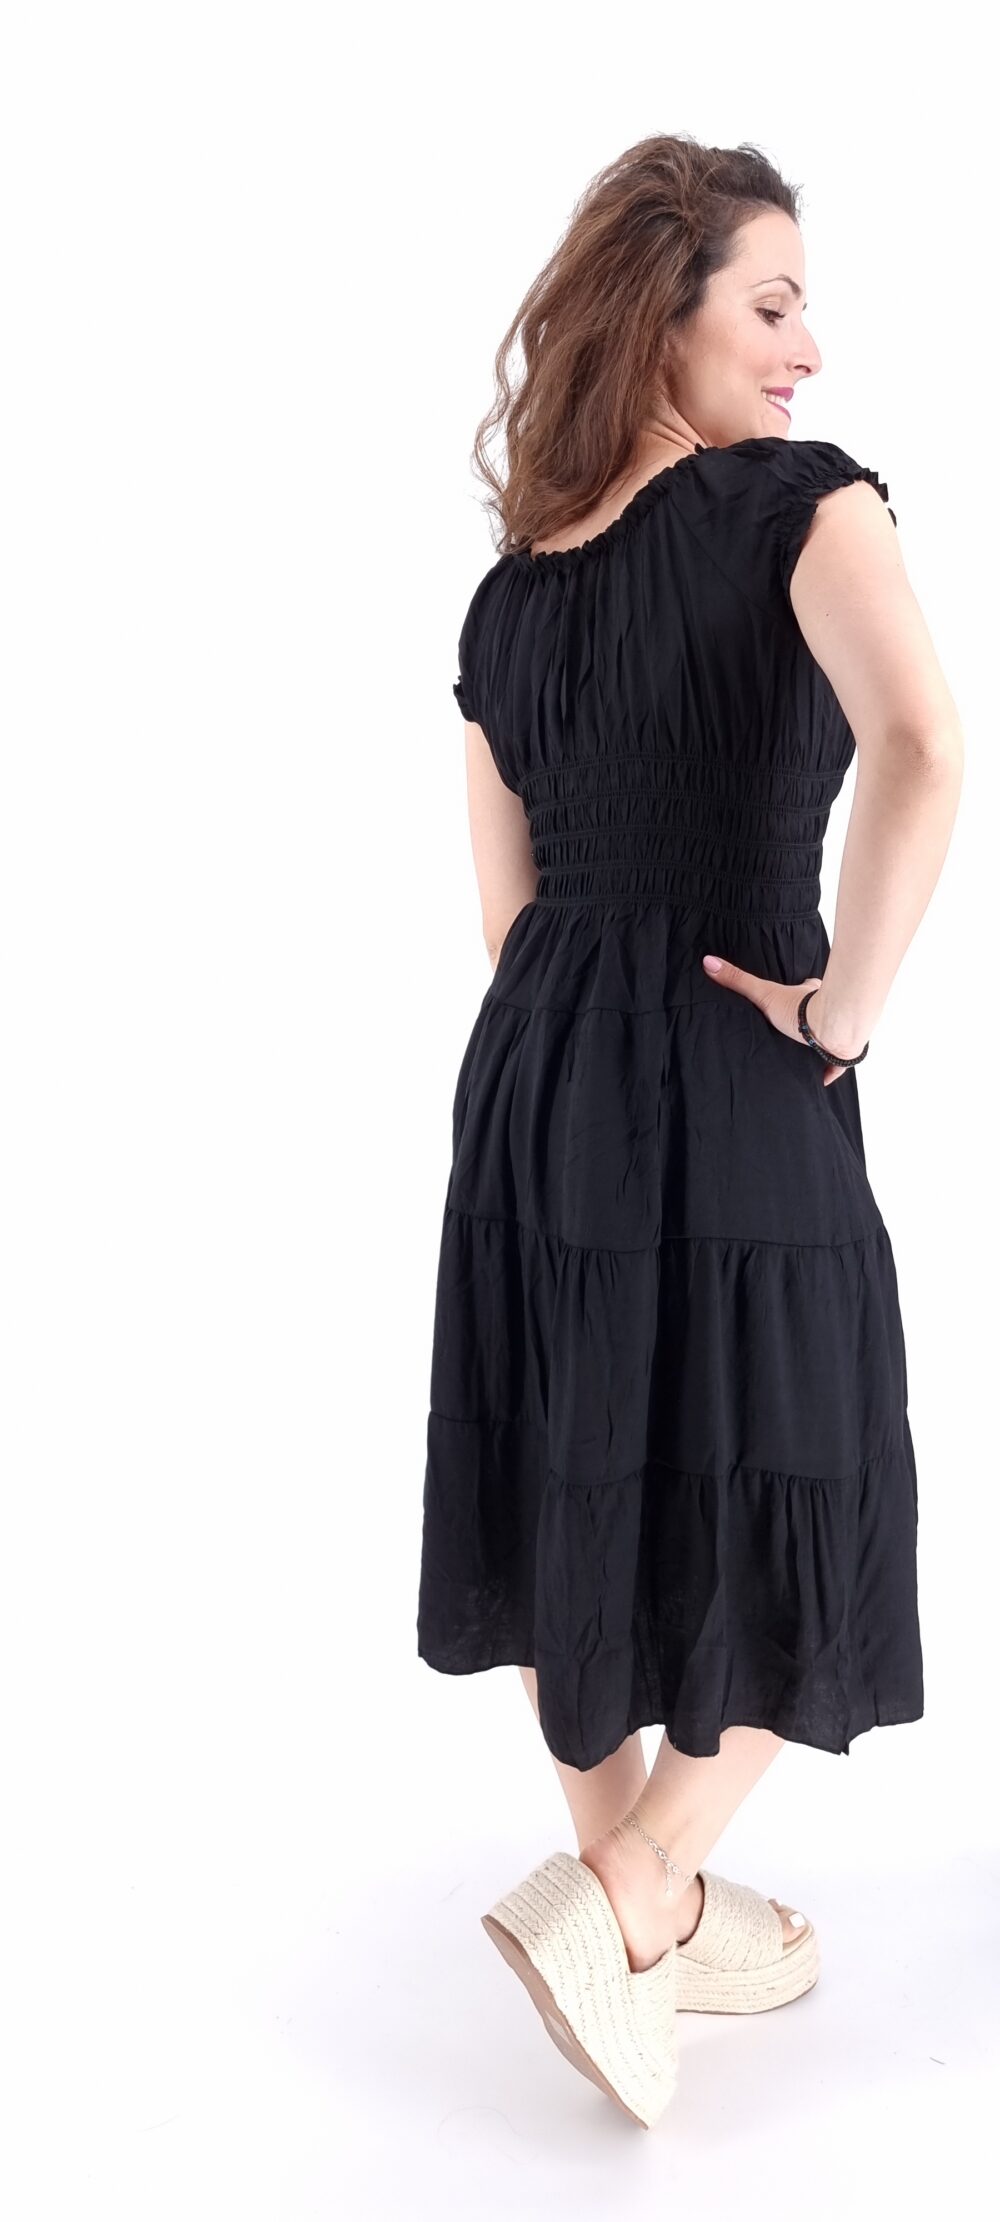 Midi dress with elastic at the waist and bodice black